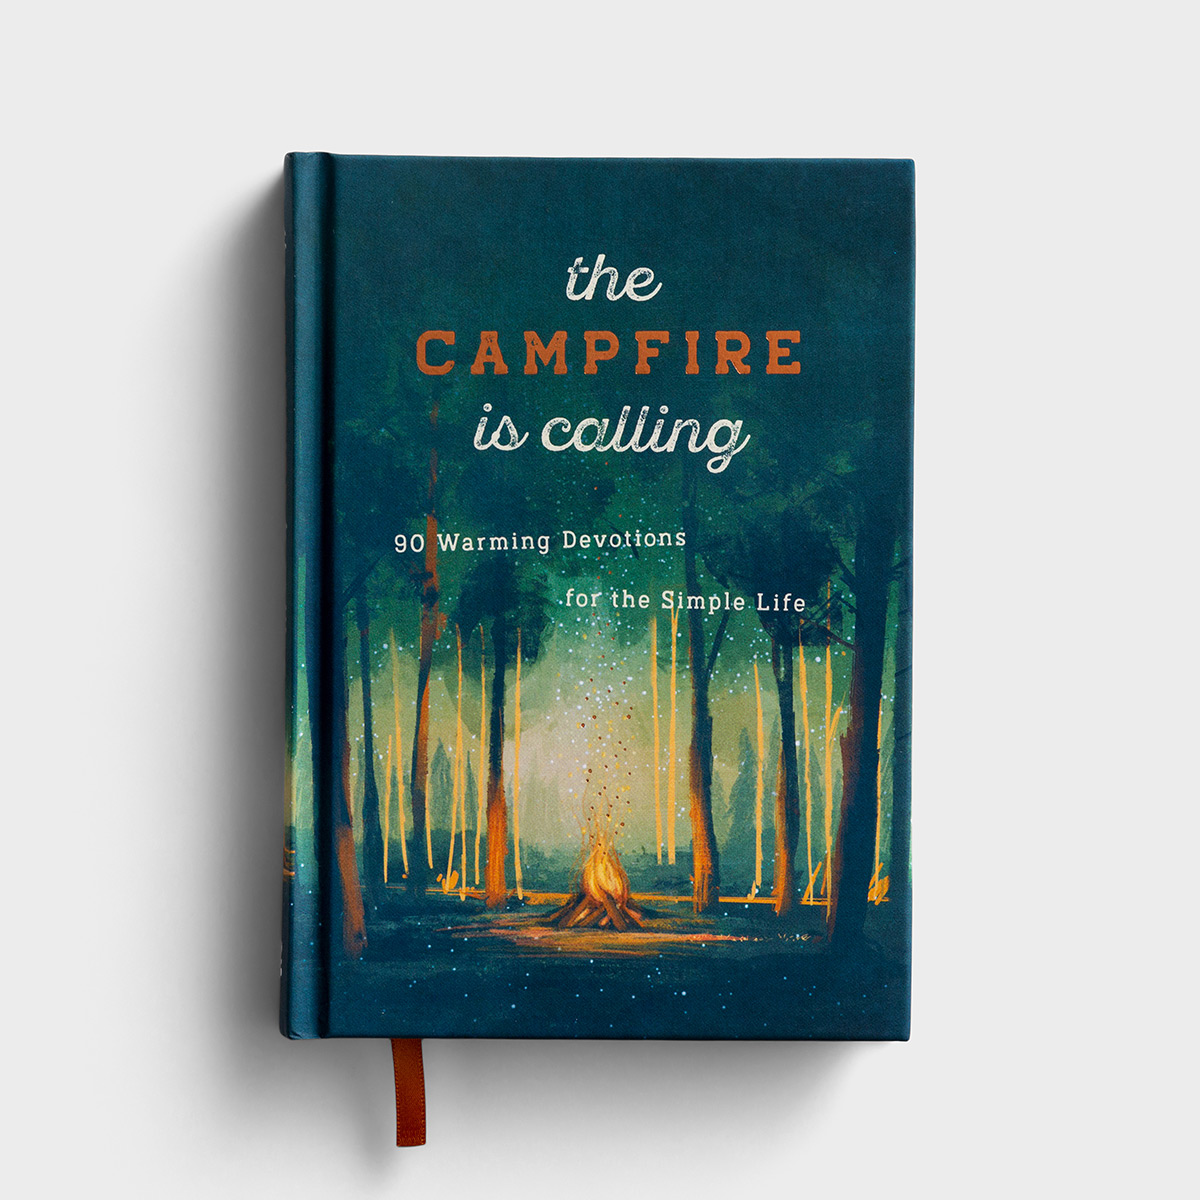 The Campfire is Calling: 90 Warming Devotions for the Simple Life